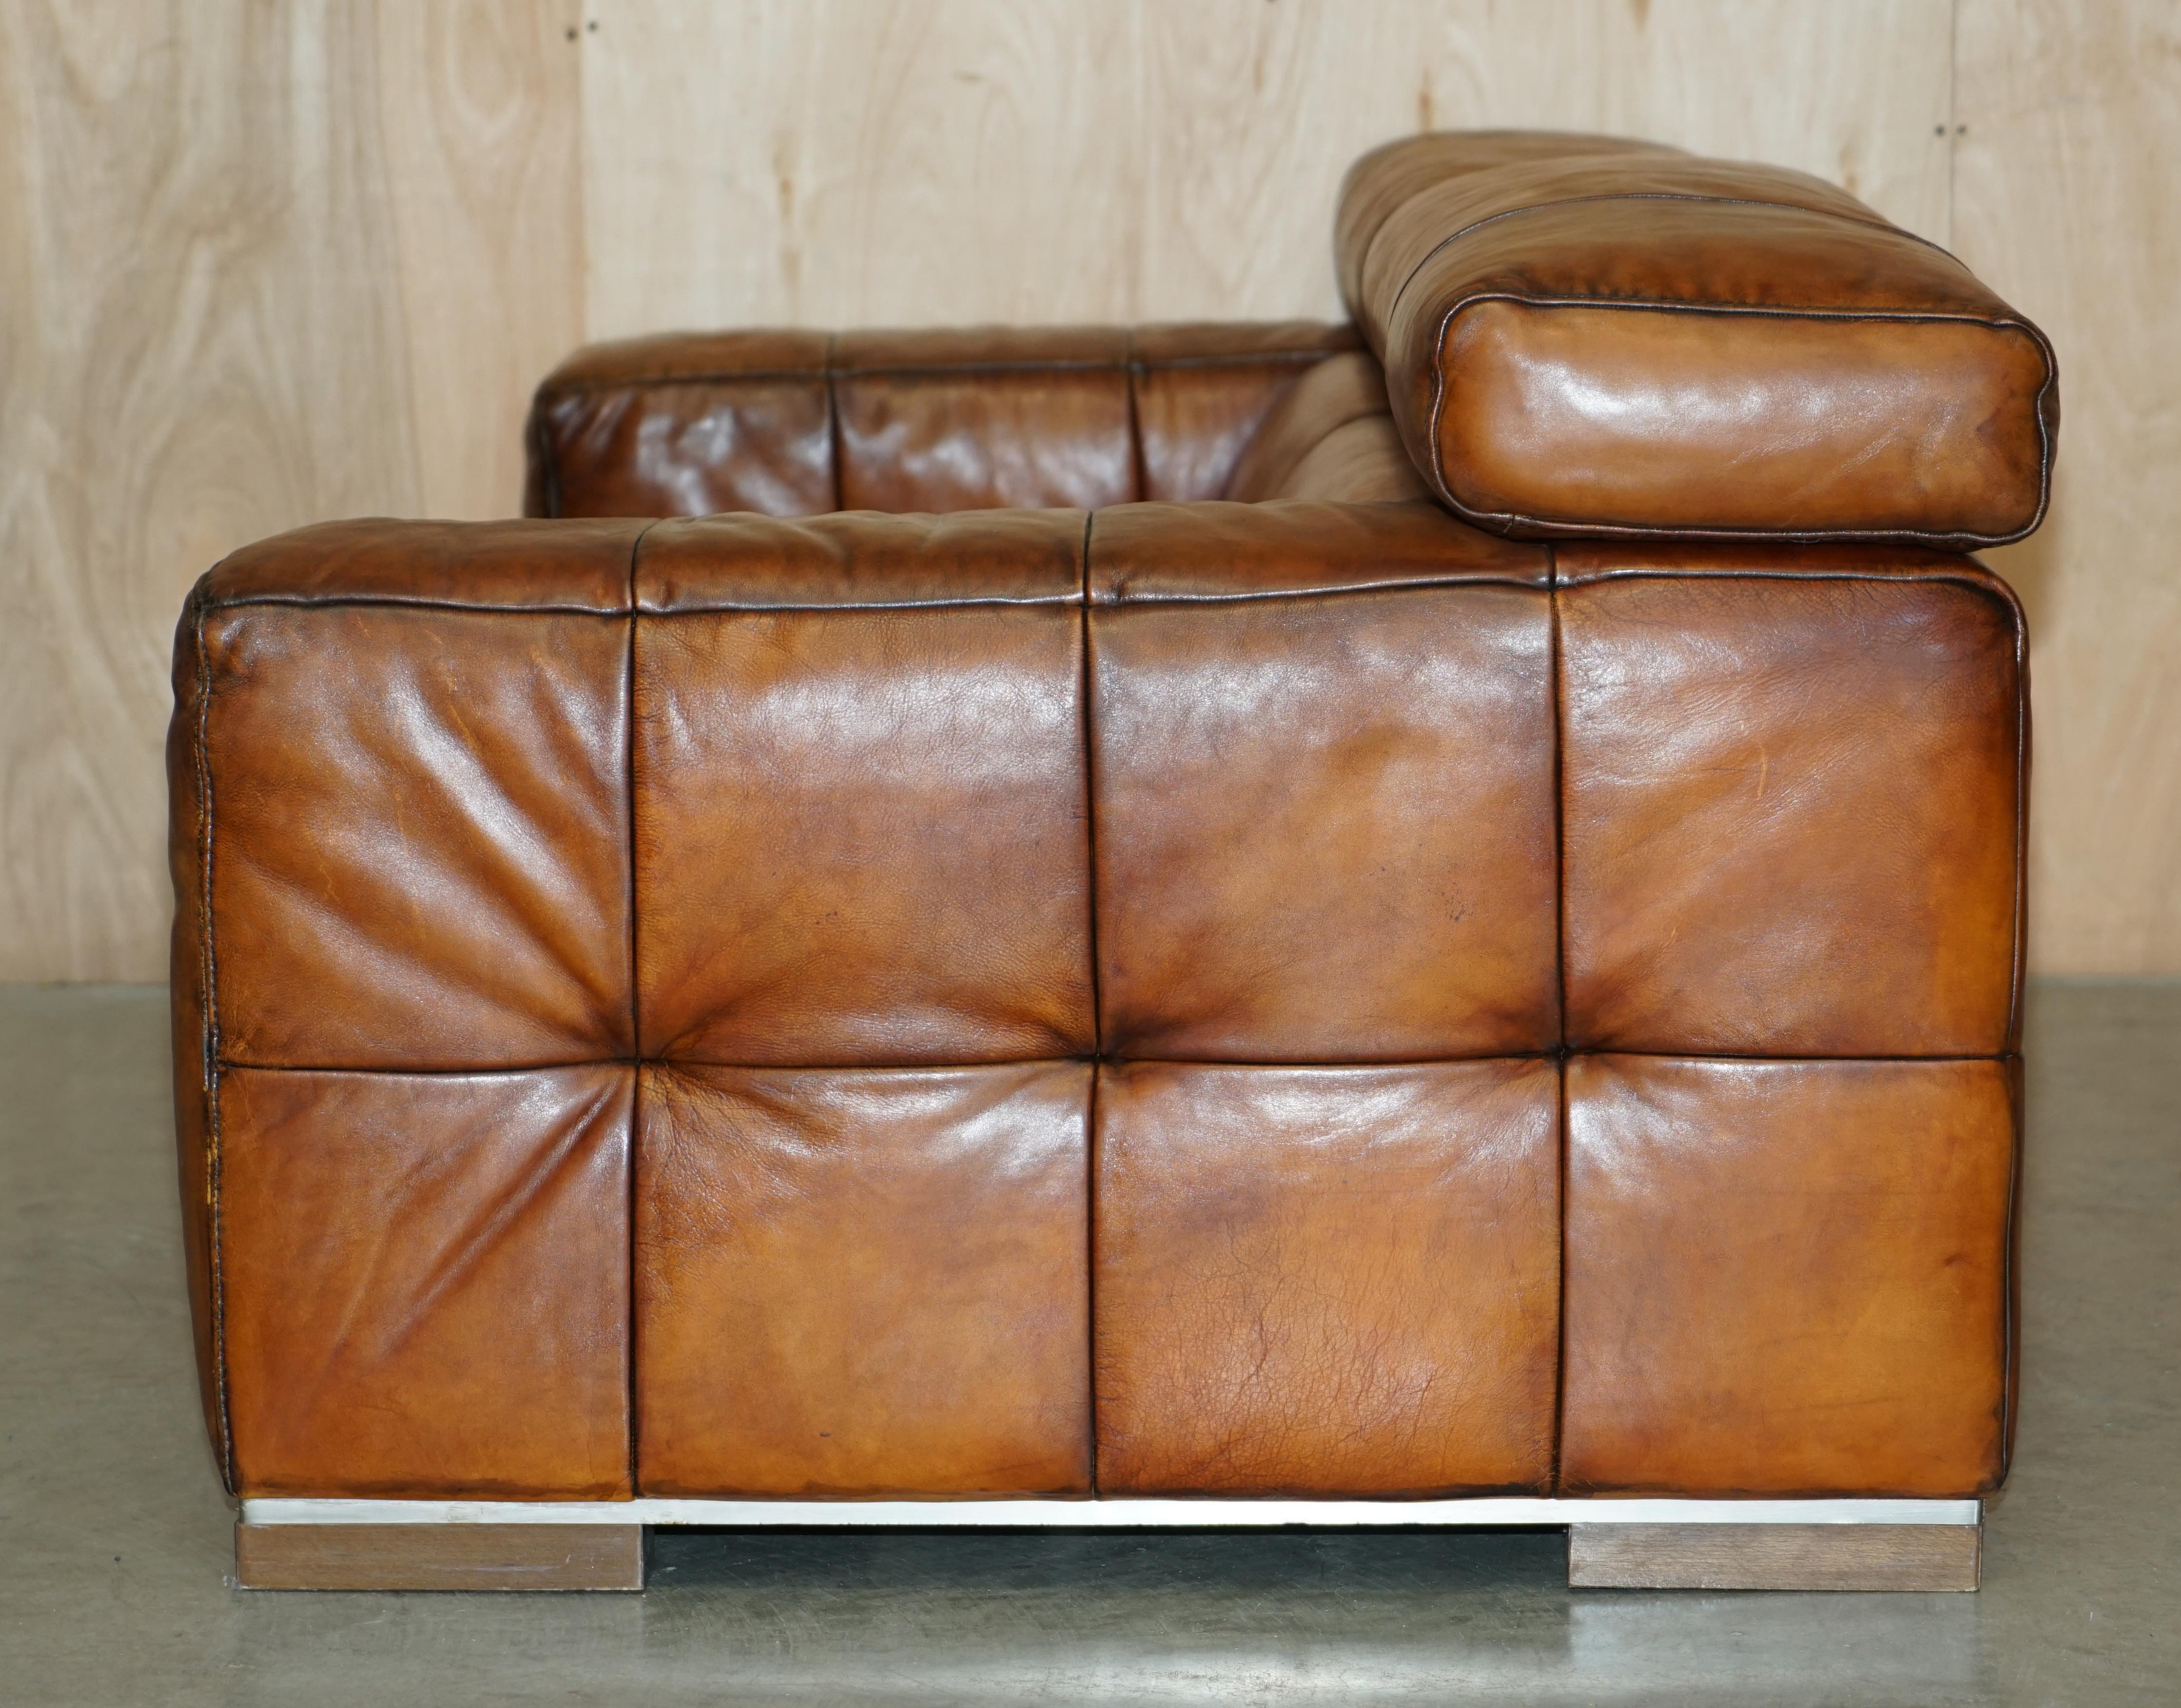 Natuzzi Roma Hand Dyed Cigar Brown Leather Sofa Raising Headrest Part of a Suite For Sale 10